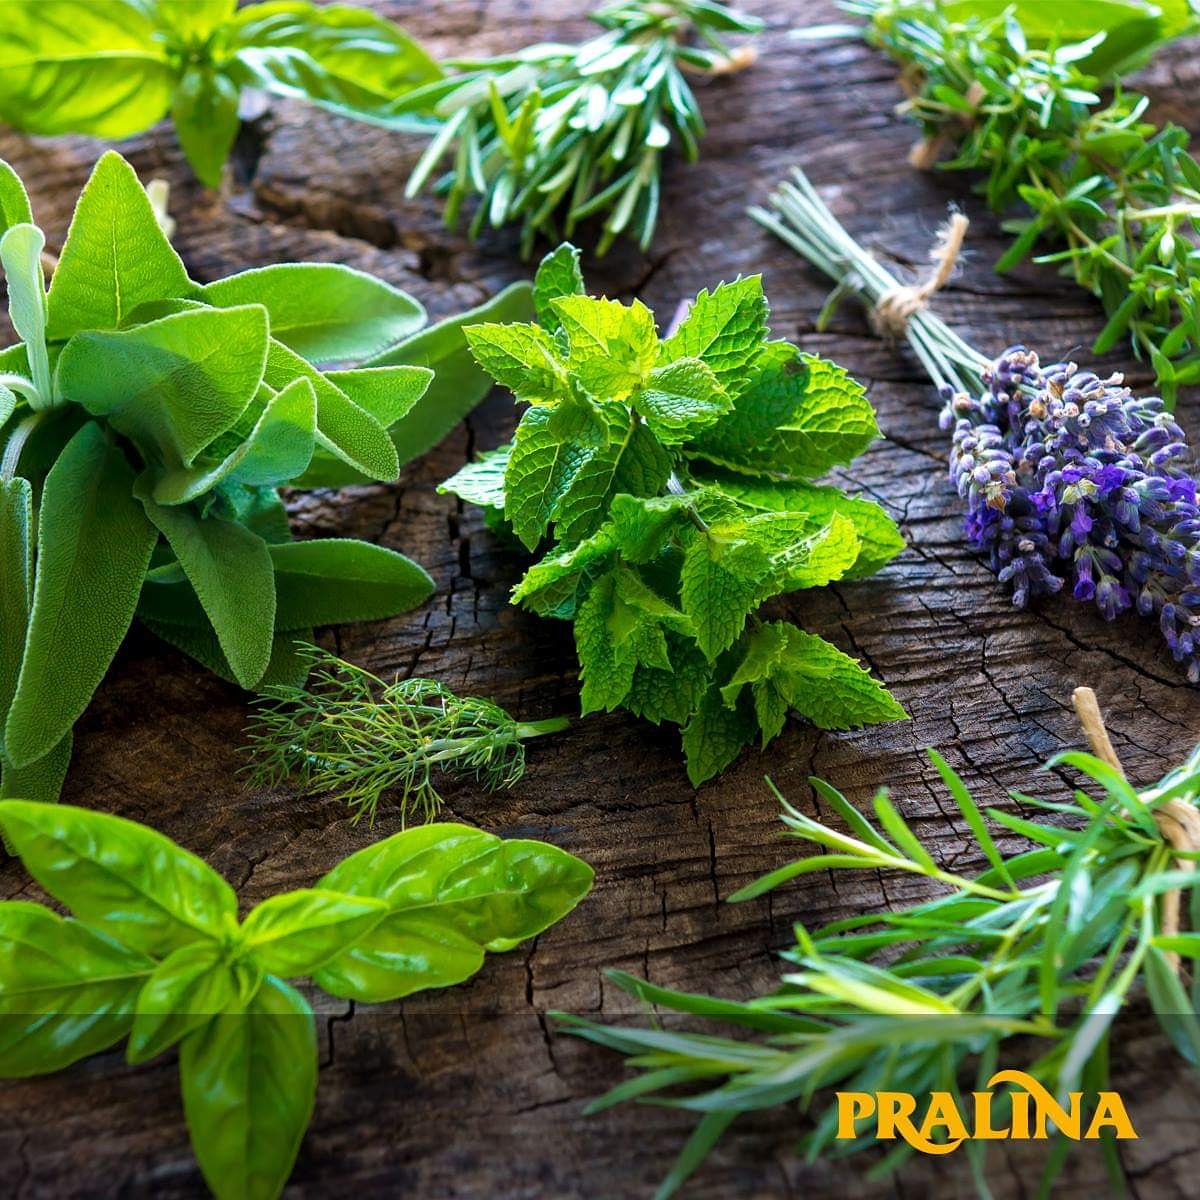 Thyme, laurel, rosemary, dill and lemon balm are the typical aromas of Salento and are used to create the delicious natural flavours in our Pralina sauces. 
#salentofoodandwine #pralinasrl #lebiodiverse #herbs #medicinal #italiansauce #organic #salento #italiancusine